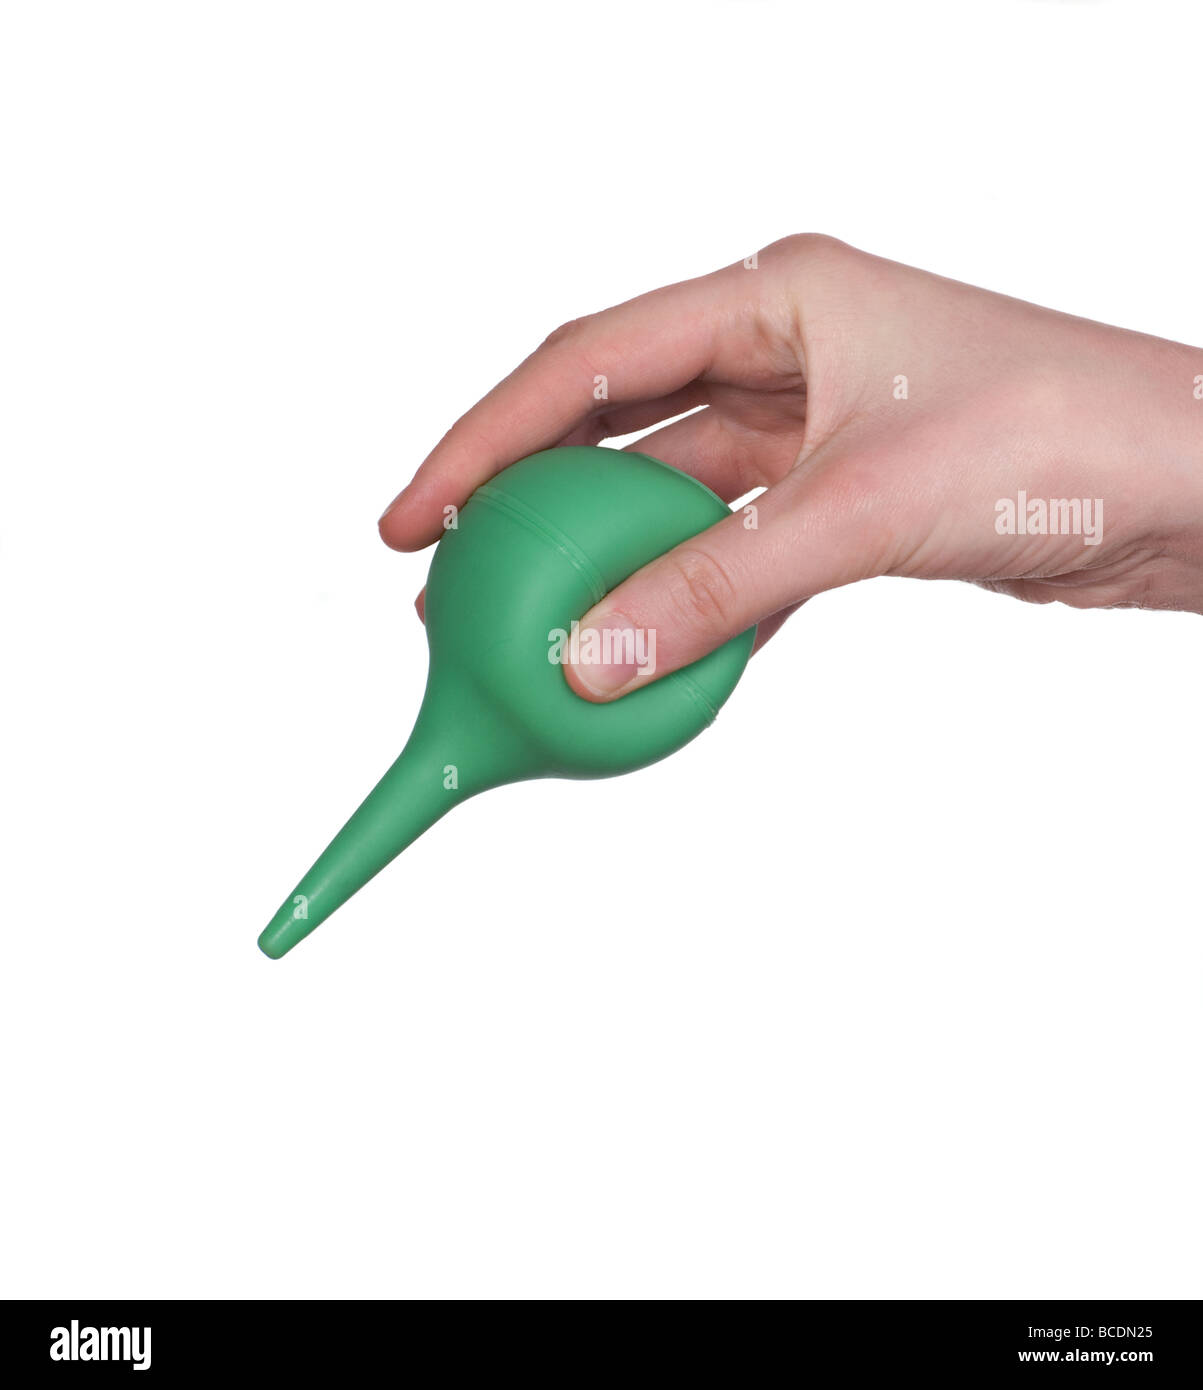 Pipette is being used in various situations Stock Photo